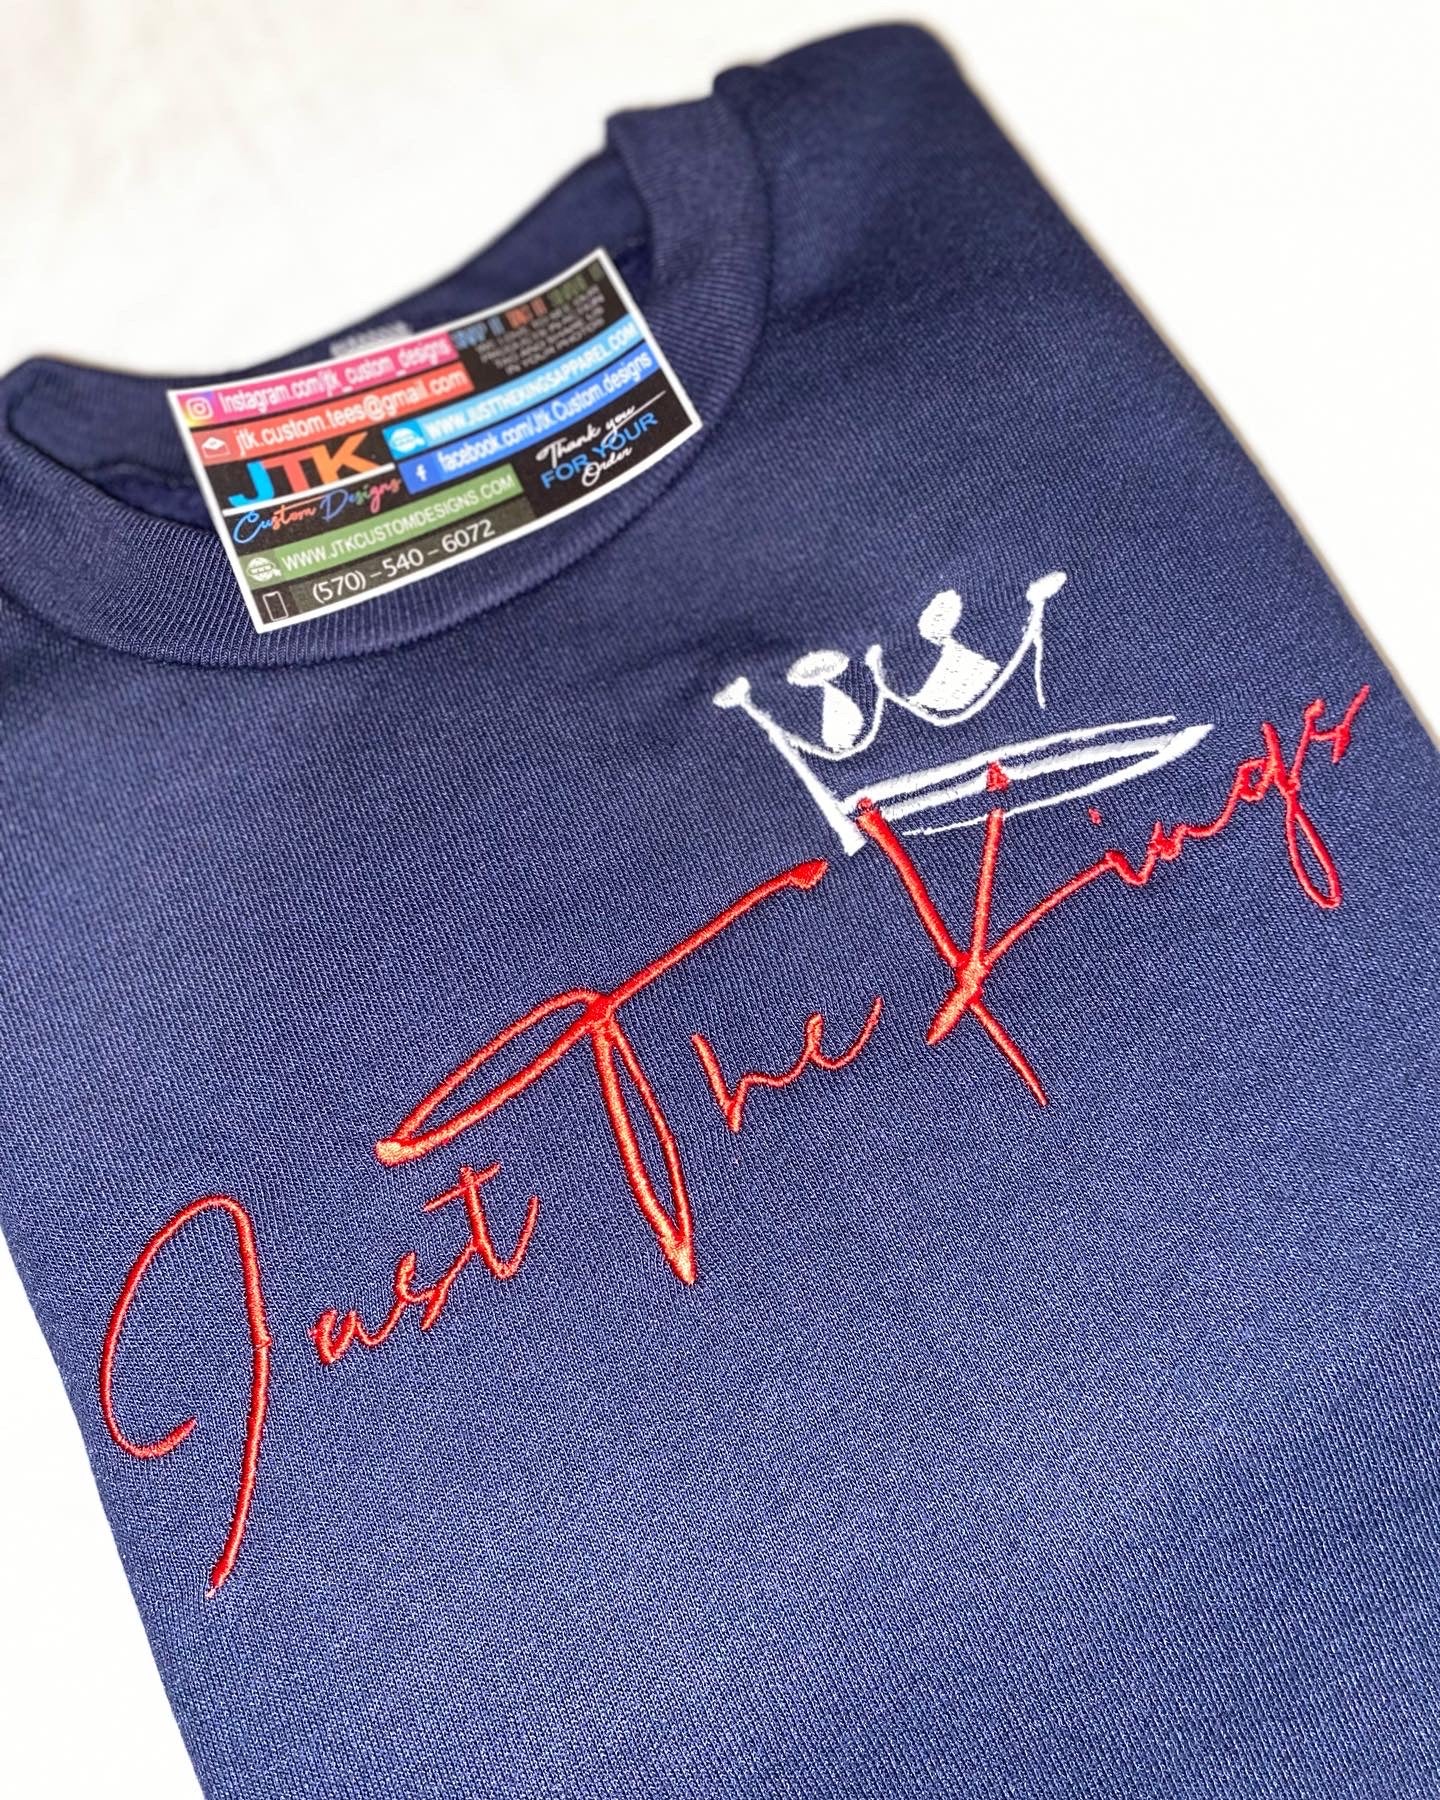 Just The Kings - New Embroidered Sweater